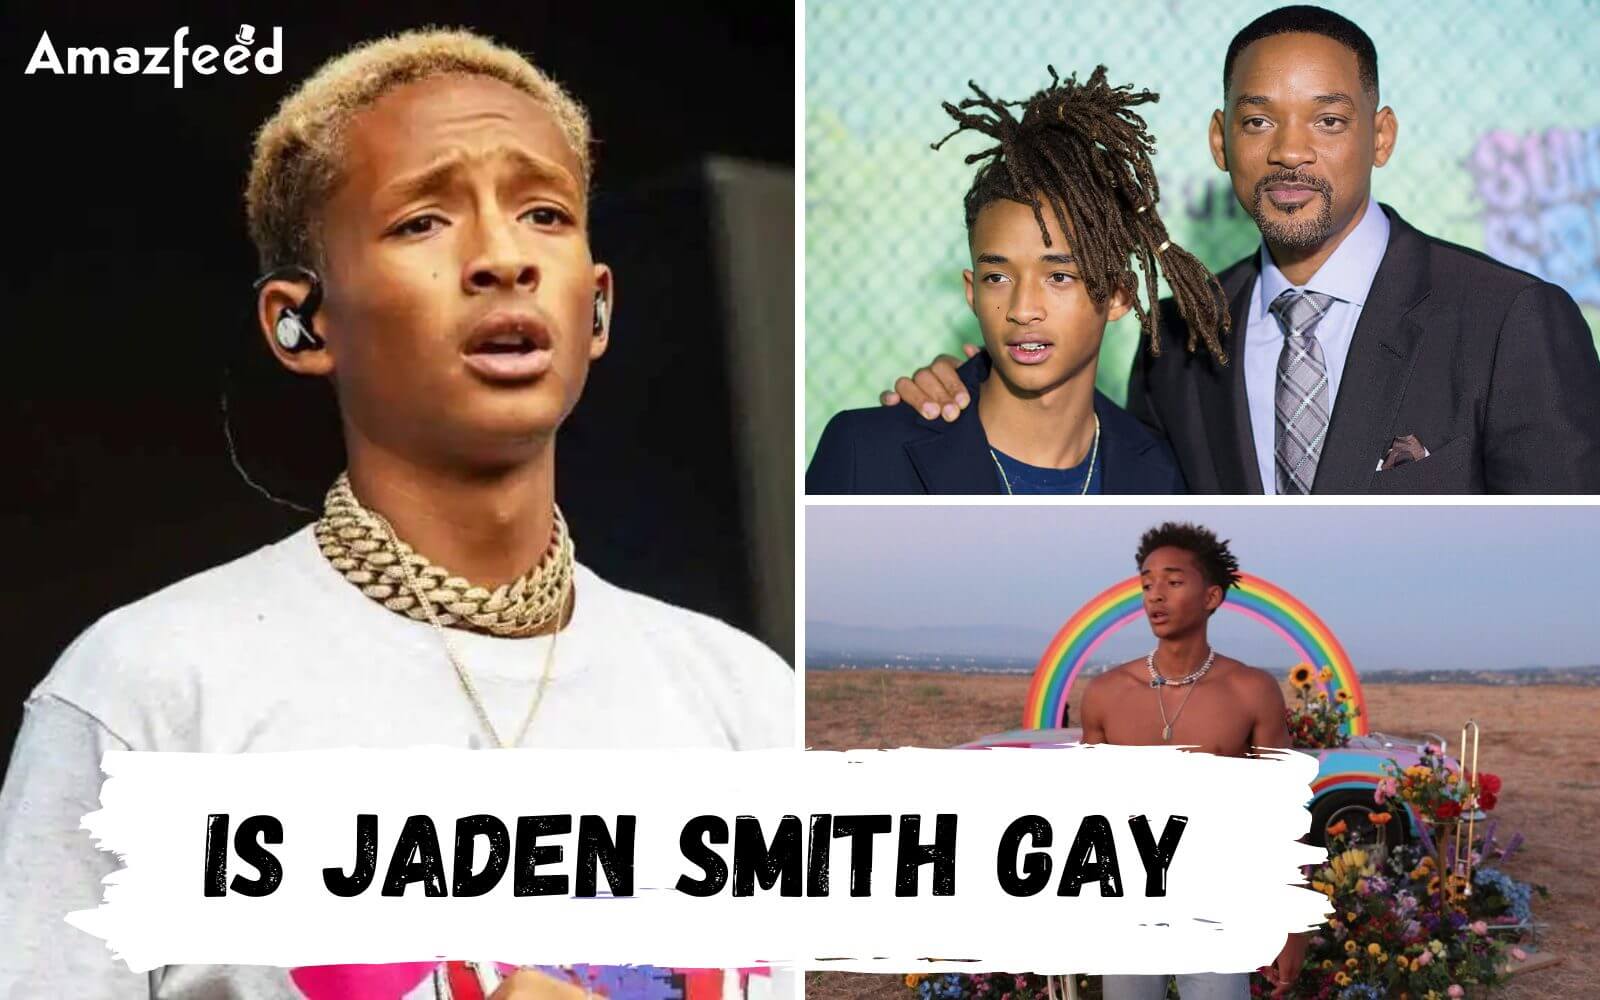 Why Do Fans Think Jaden Smith Is Gay